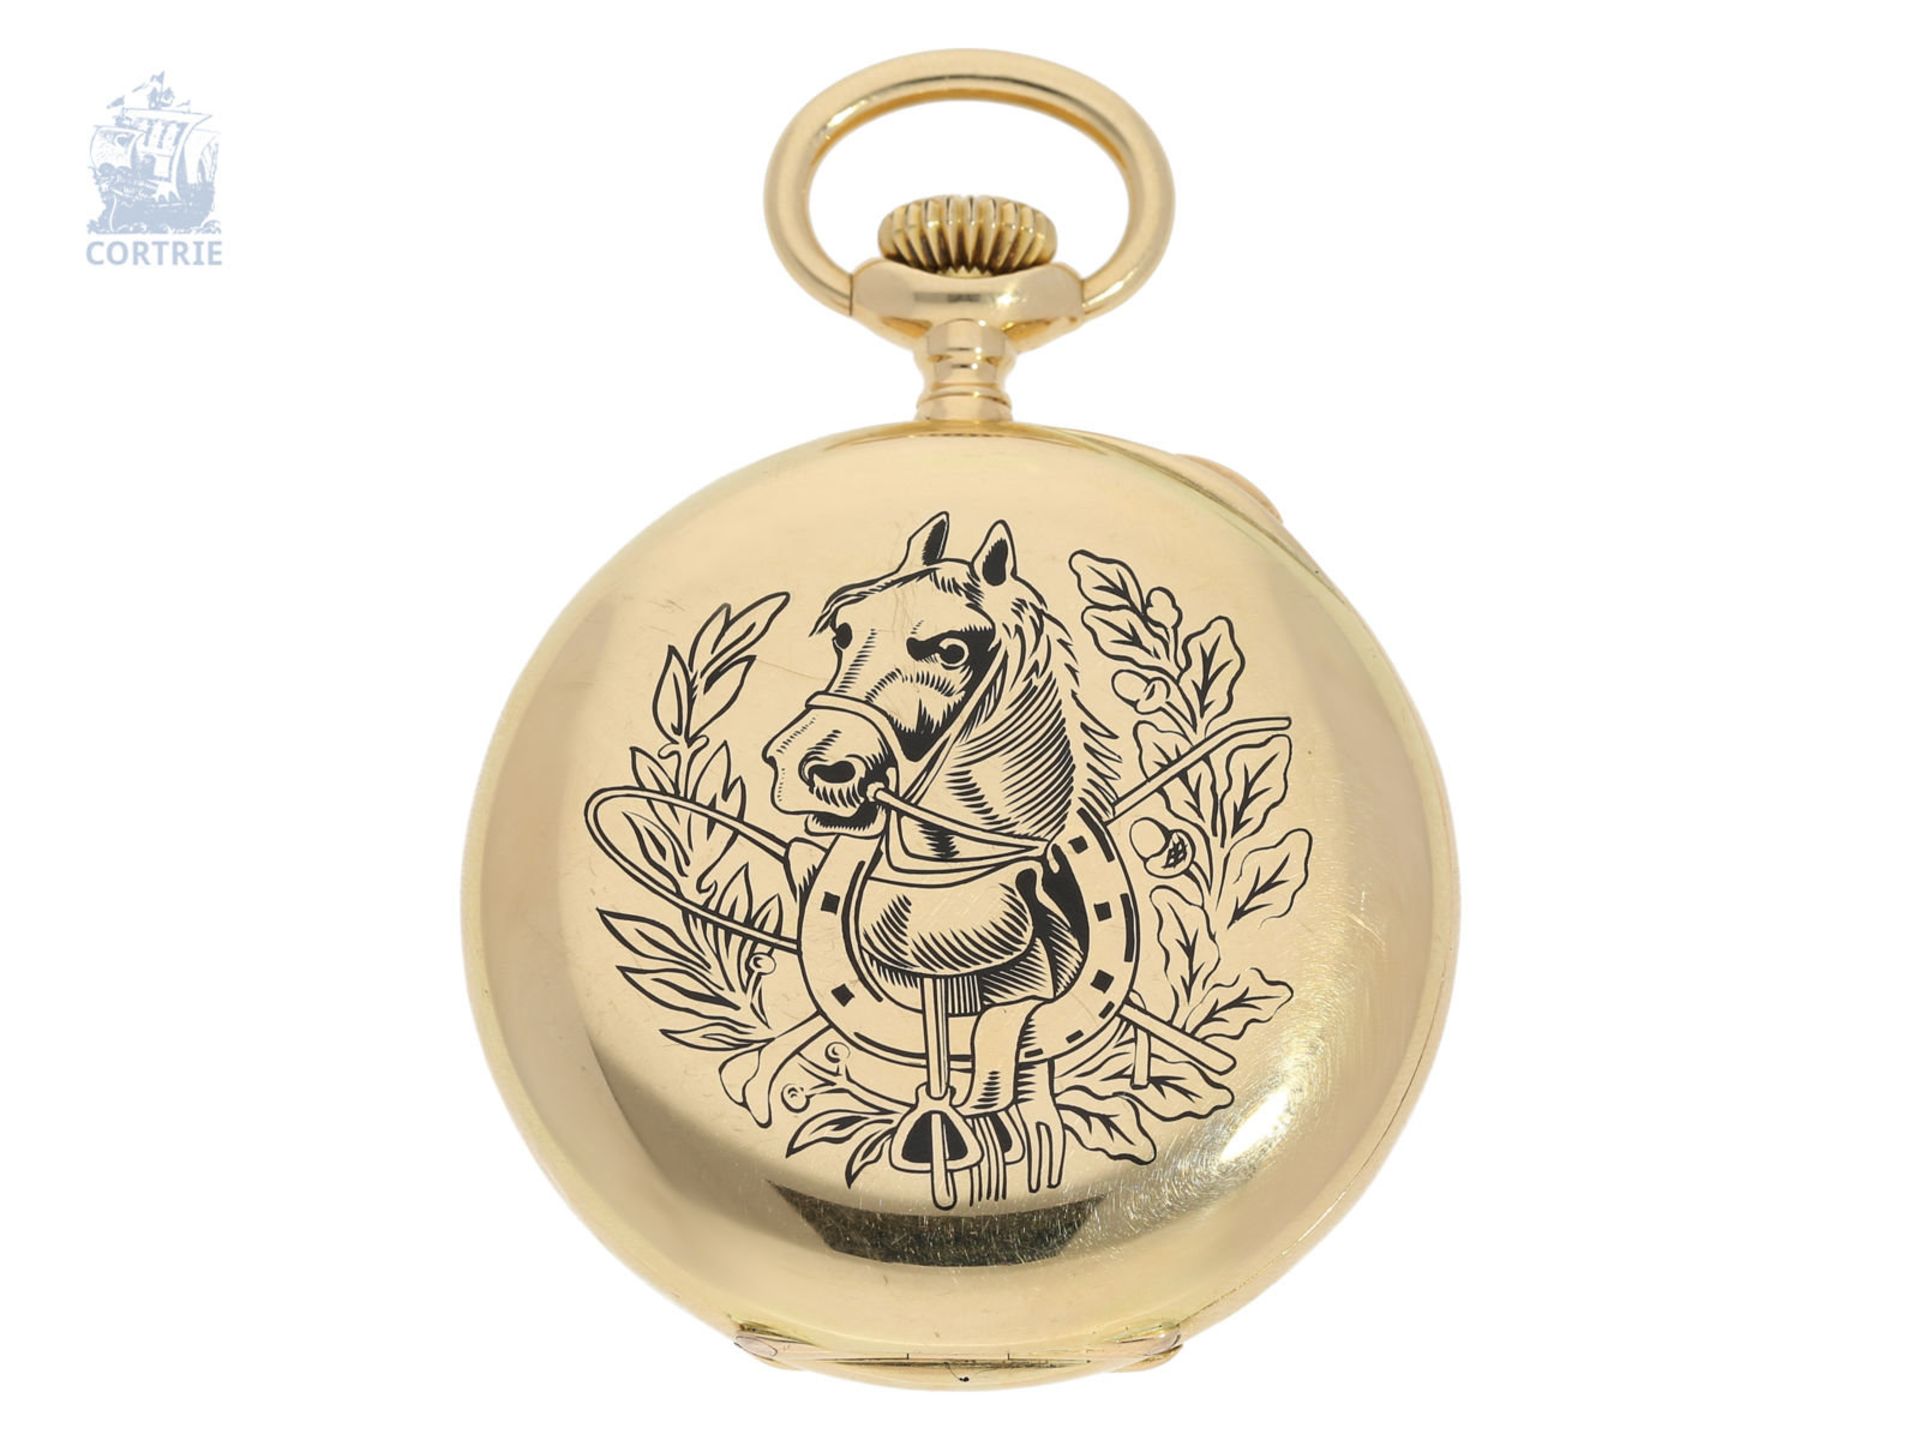 Pocket watch: very fine, small chronograph Rattrapante, gold/enamel case, Bailey, Banks & Biddle, no - Image 2 of 7